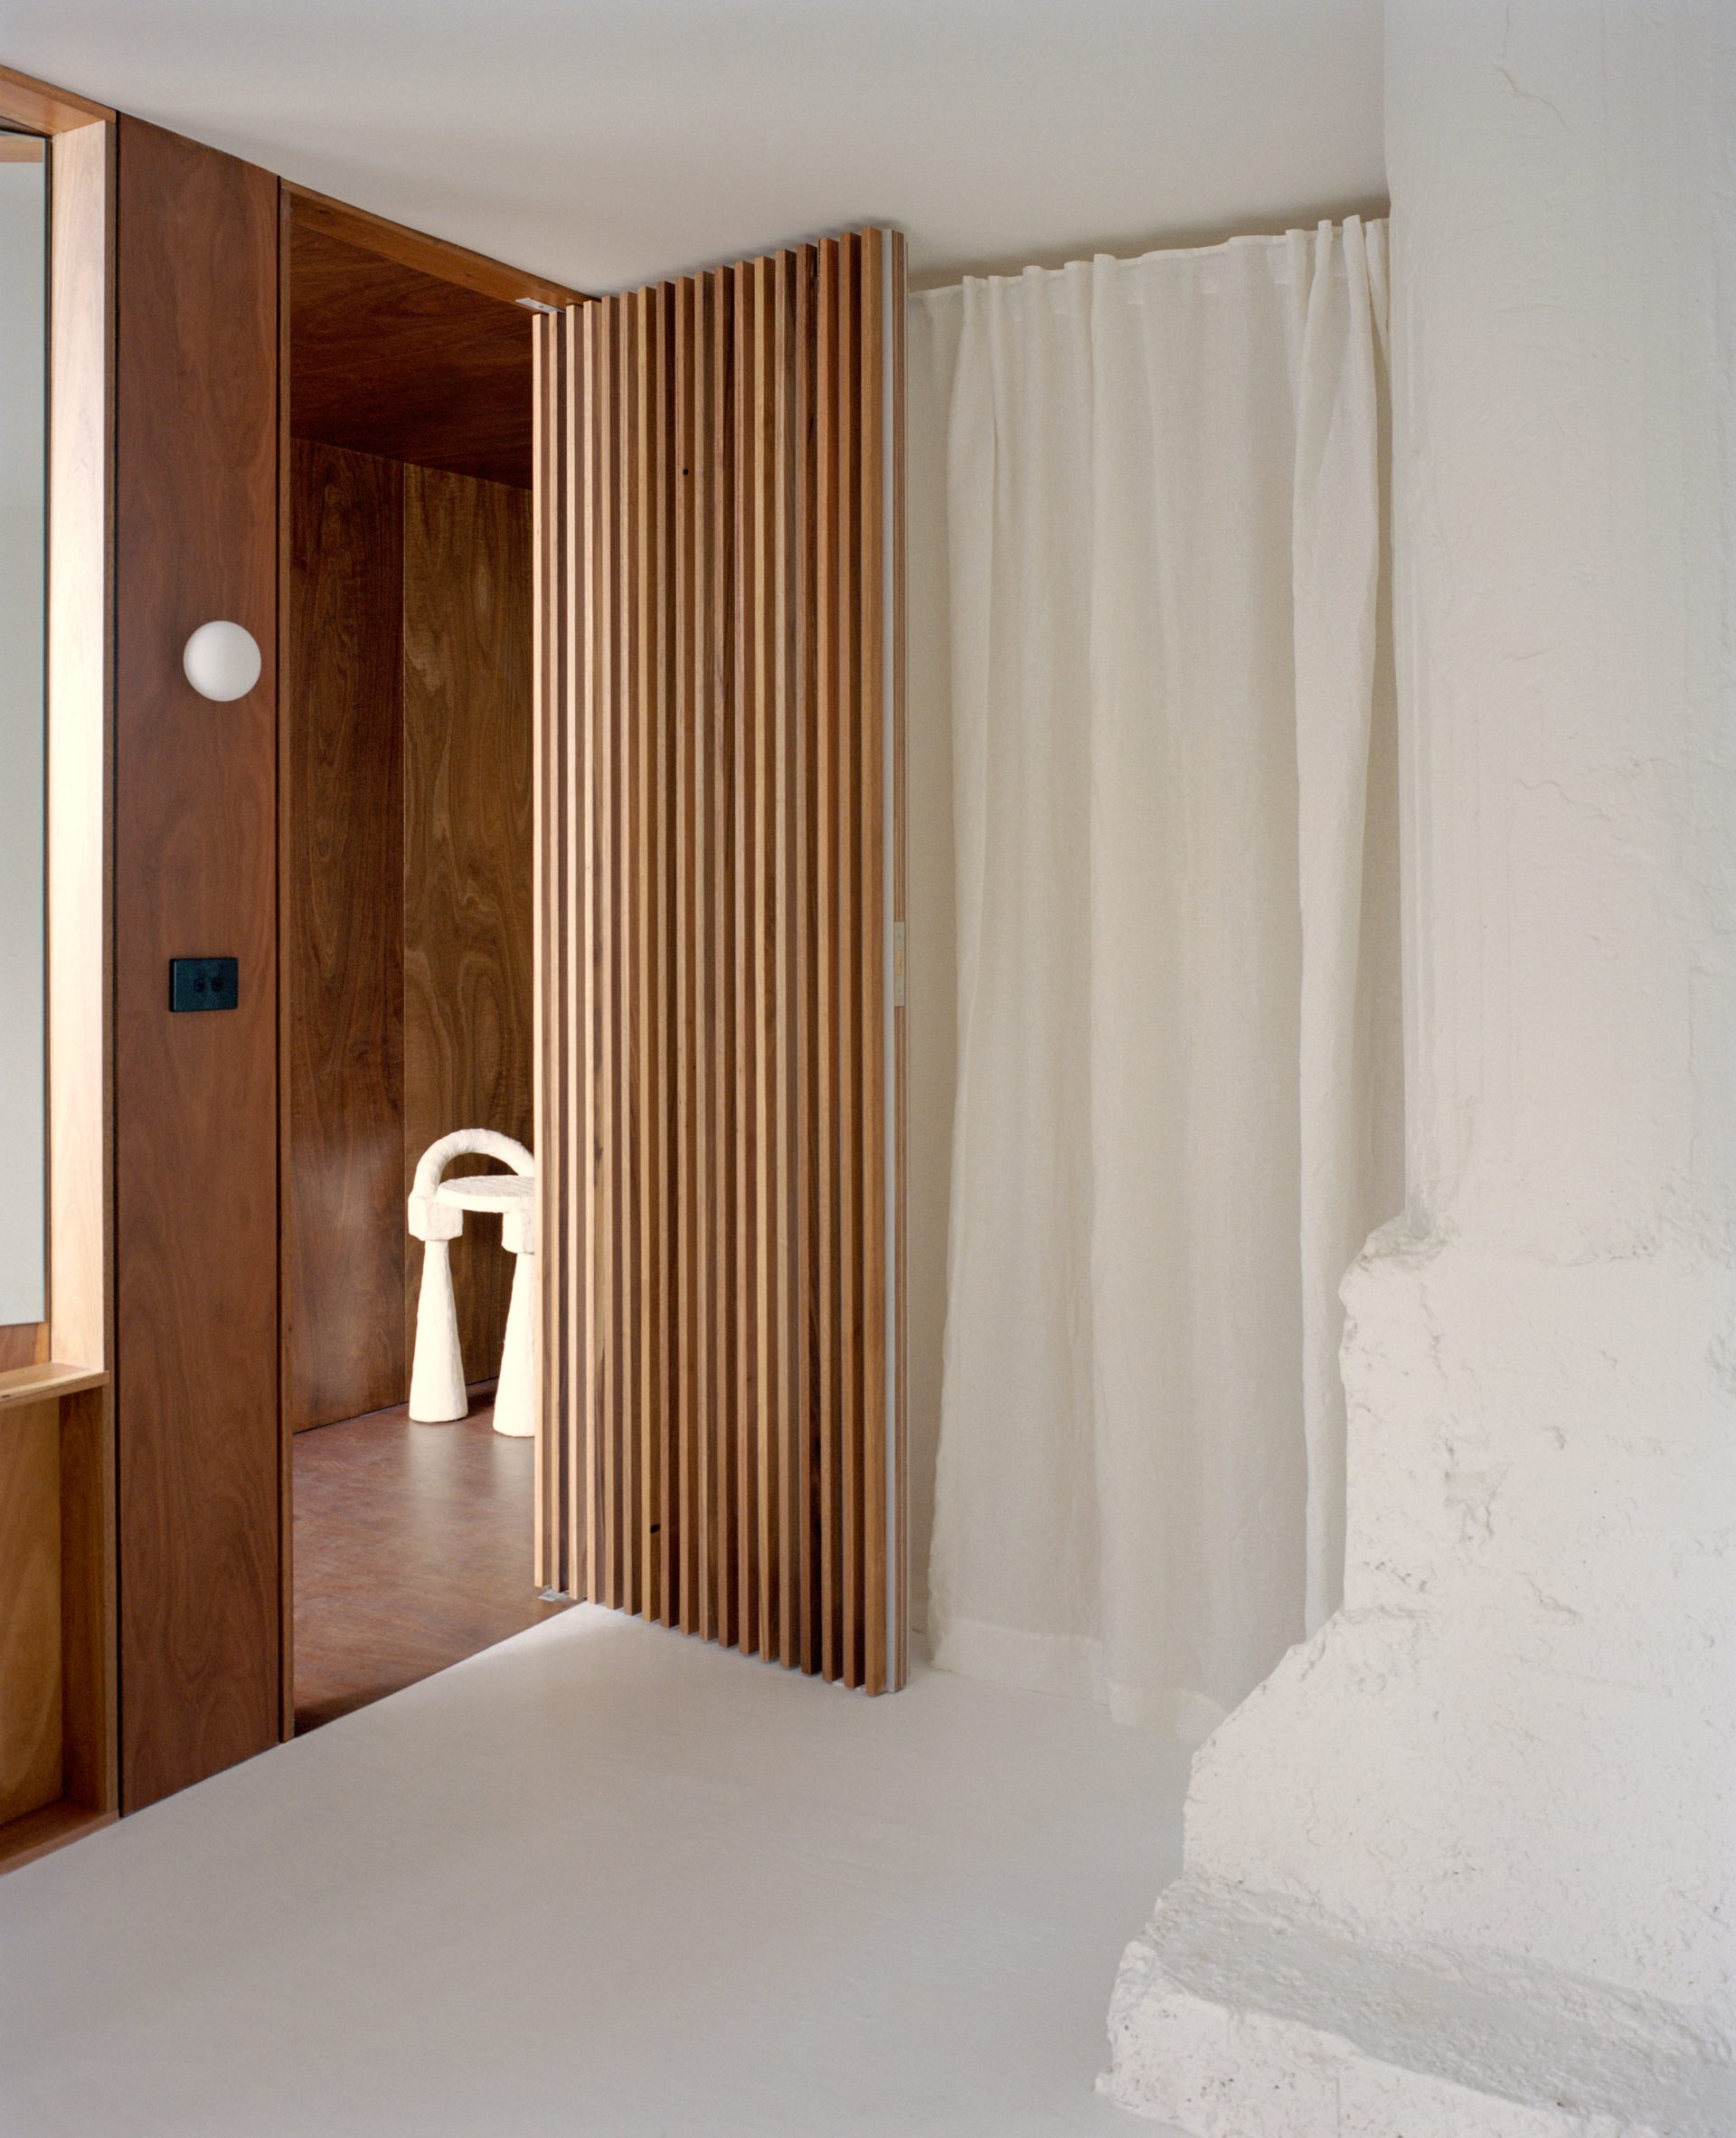 Gridded timber door next to translucent curtains that cordon off a bedroom 